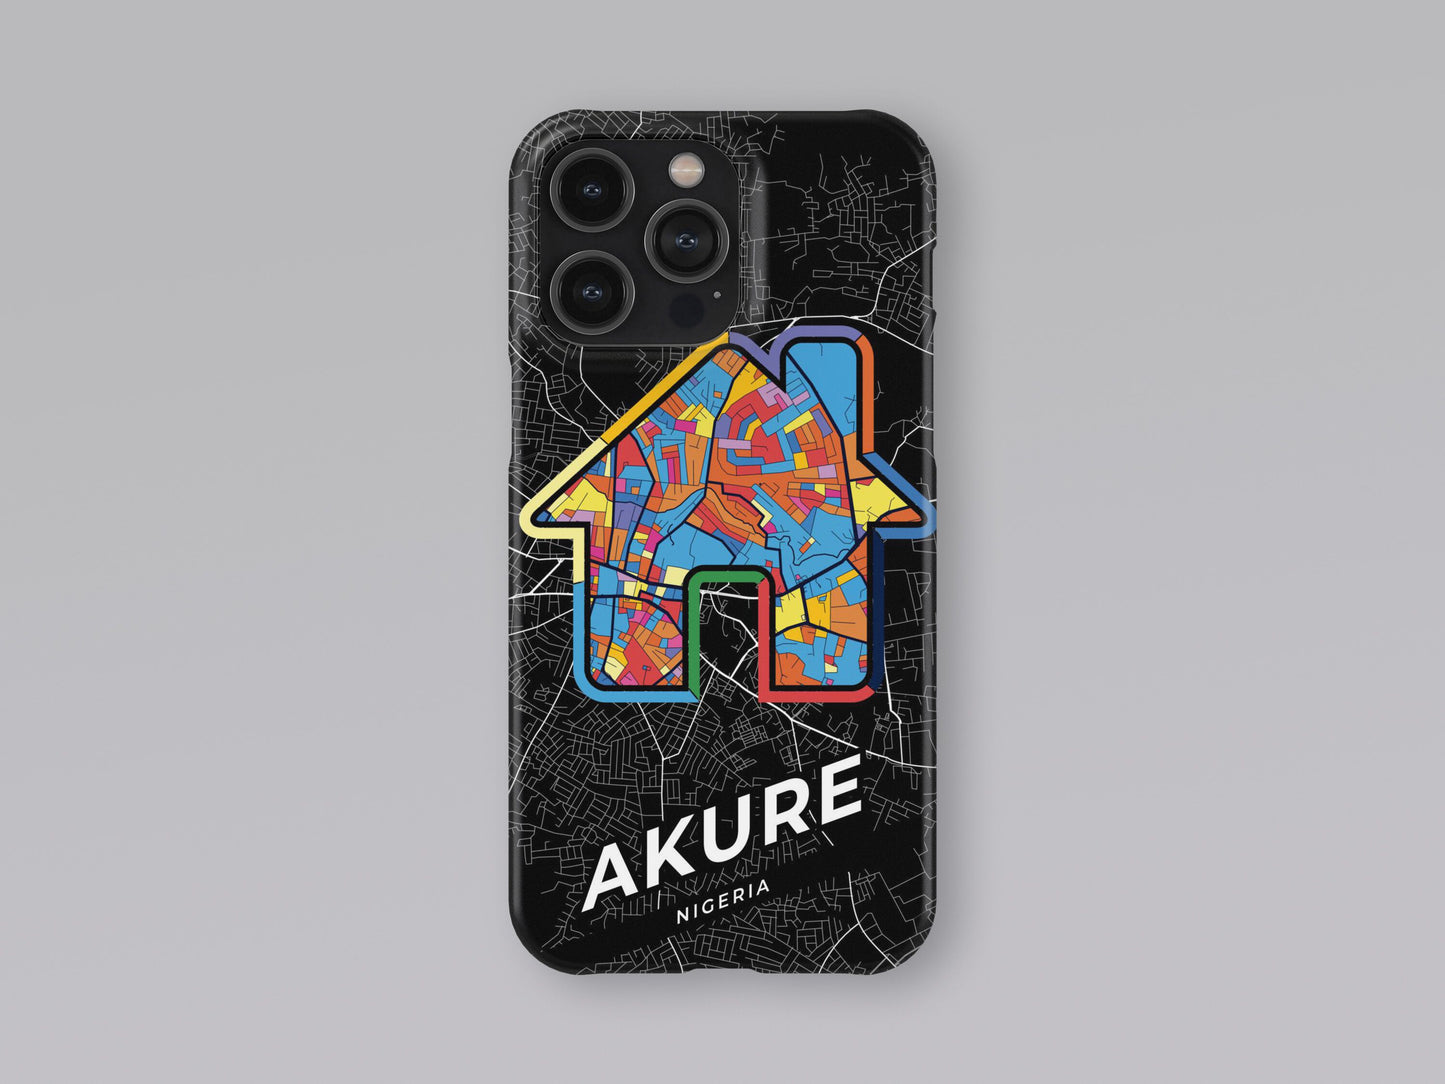 Akure Nigeria slim phone case with colorful icon. Birthday, wedding or housewarming gift. Couple match cases. 3